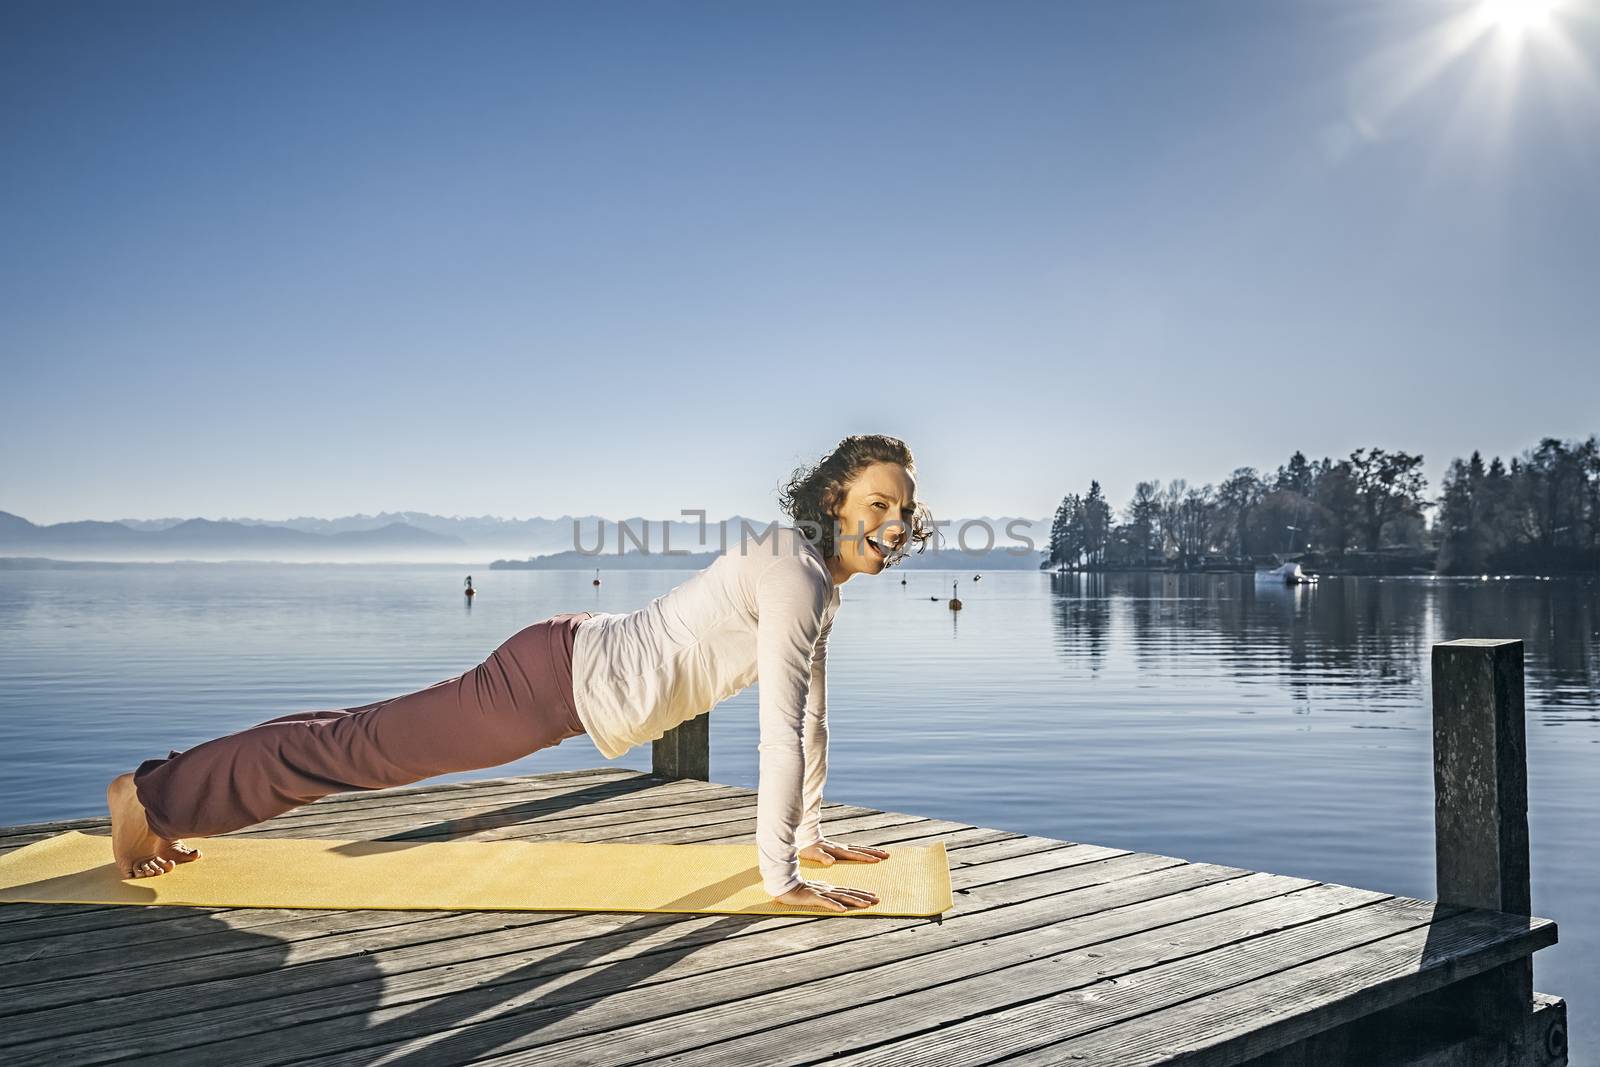 An image of a pretty woman doing yoga at the lake